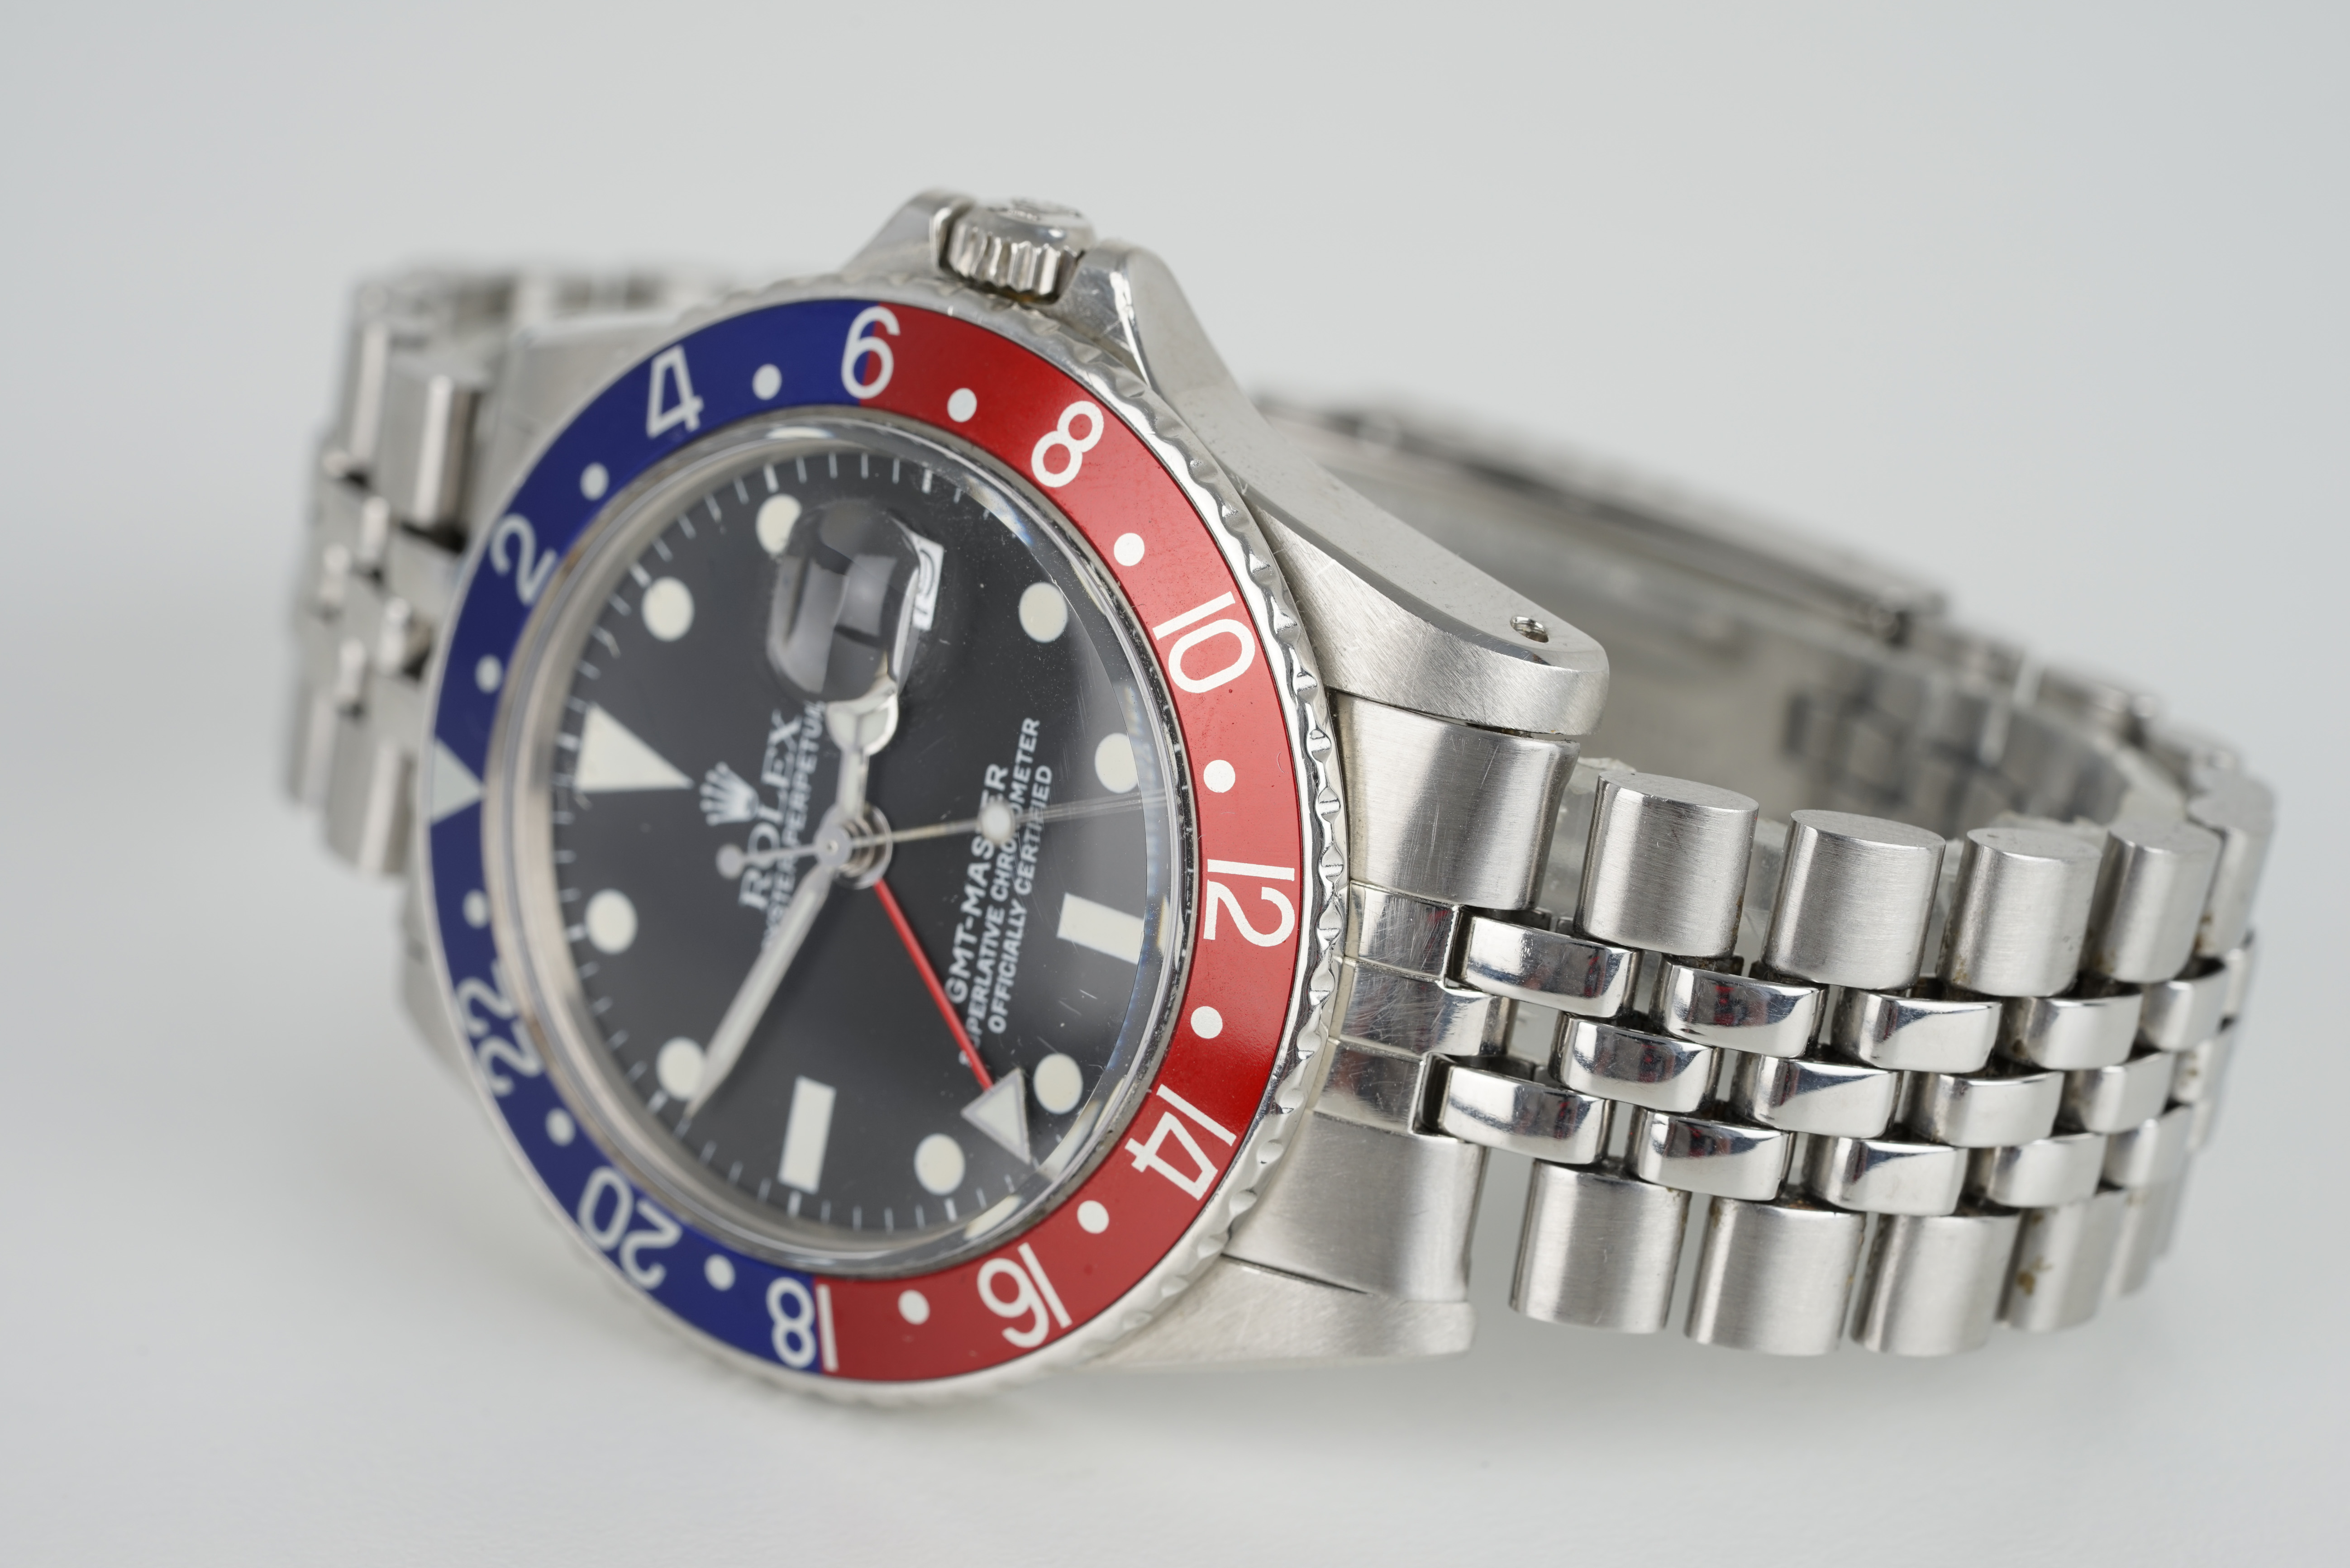 GENTLEMENS ROLEX OYSTER PERPETUAL GMT MASTER WRISTWATCH FULL SET W/ BOX & GUARANTEE REF. 1675 - Image 3 of 7